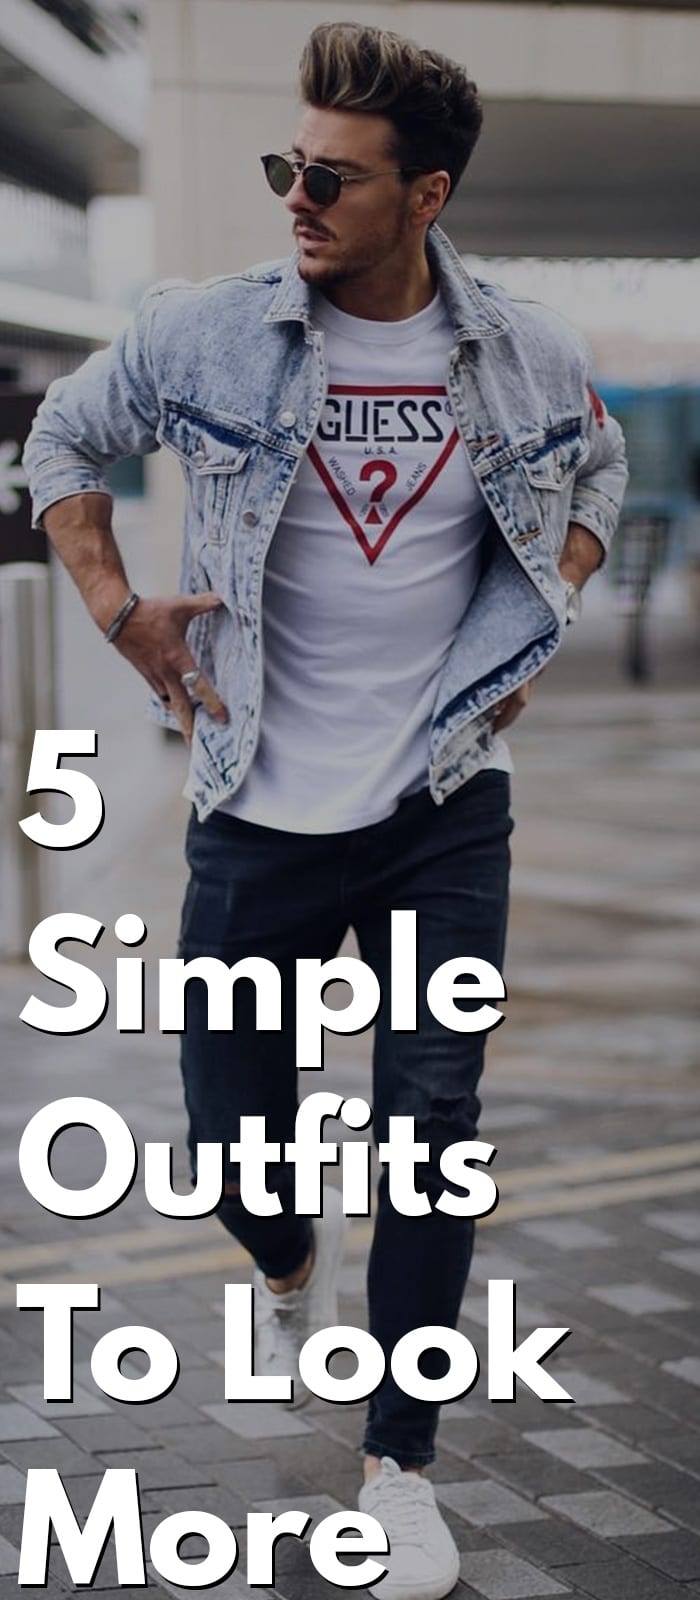 Outfits That Make You Look More Muscular - Short Sleeve T-shirt, Balanced Outfit, White Shirt, etc